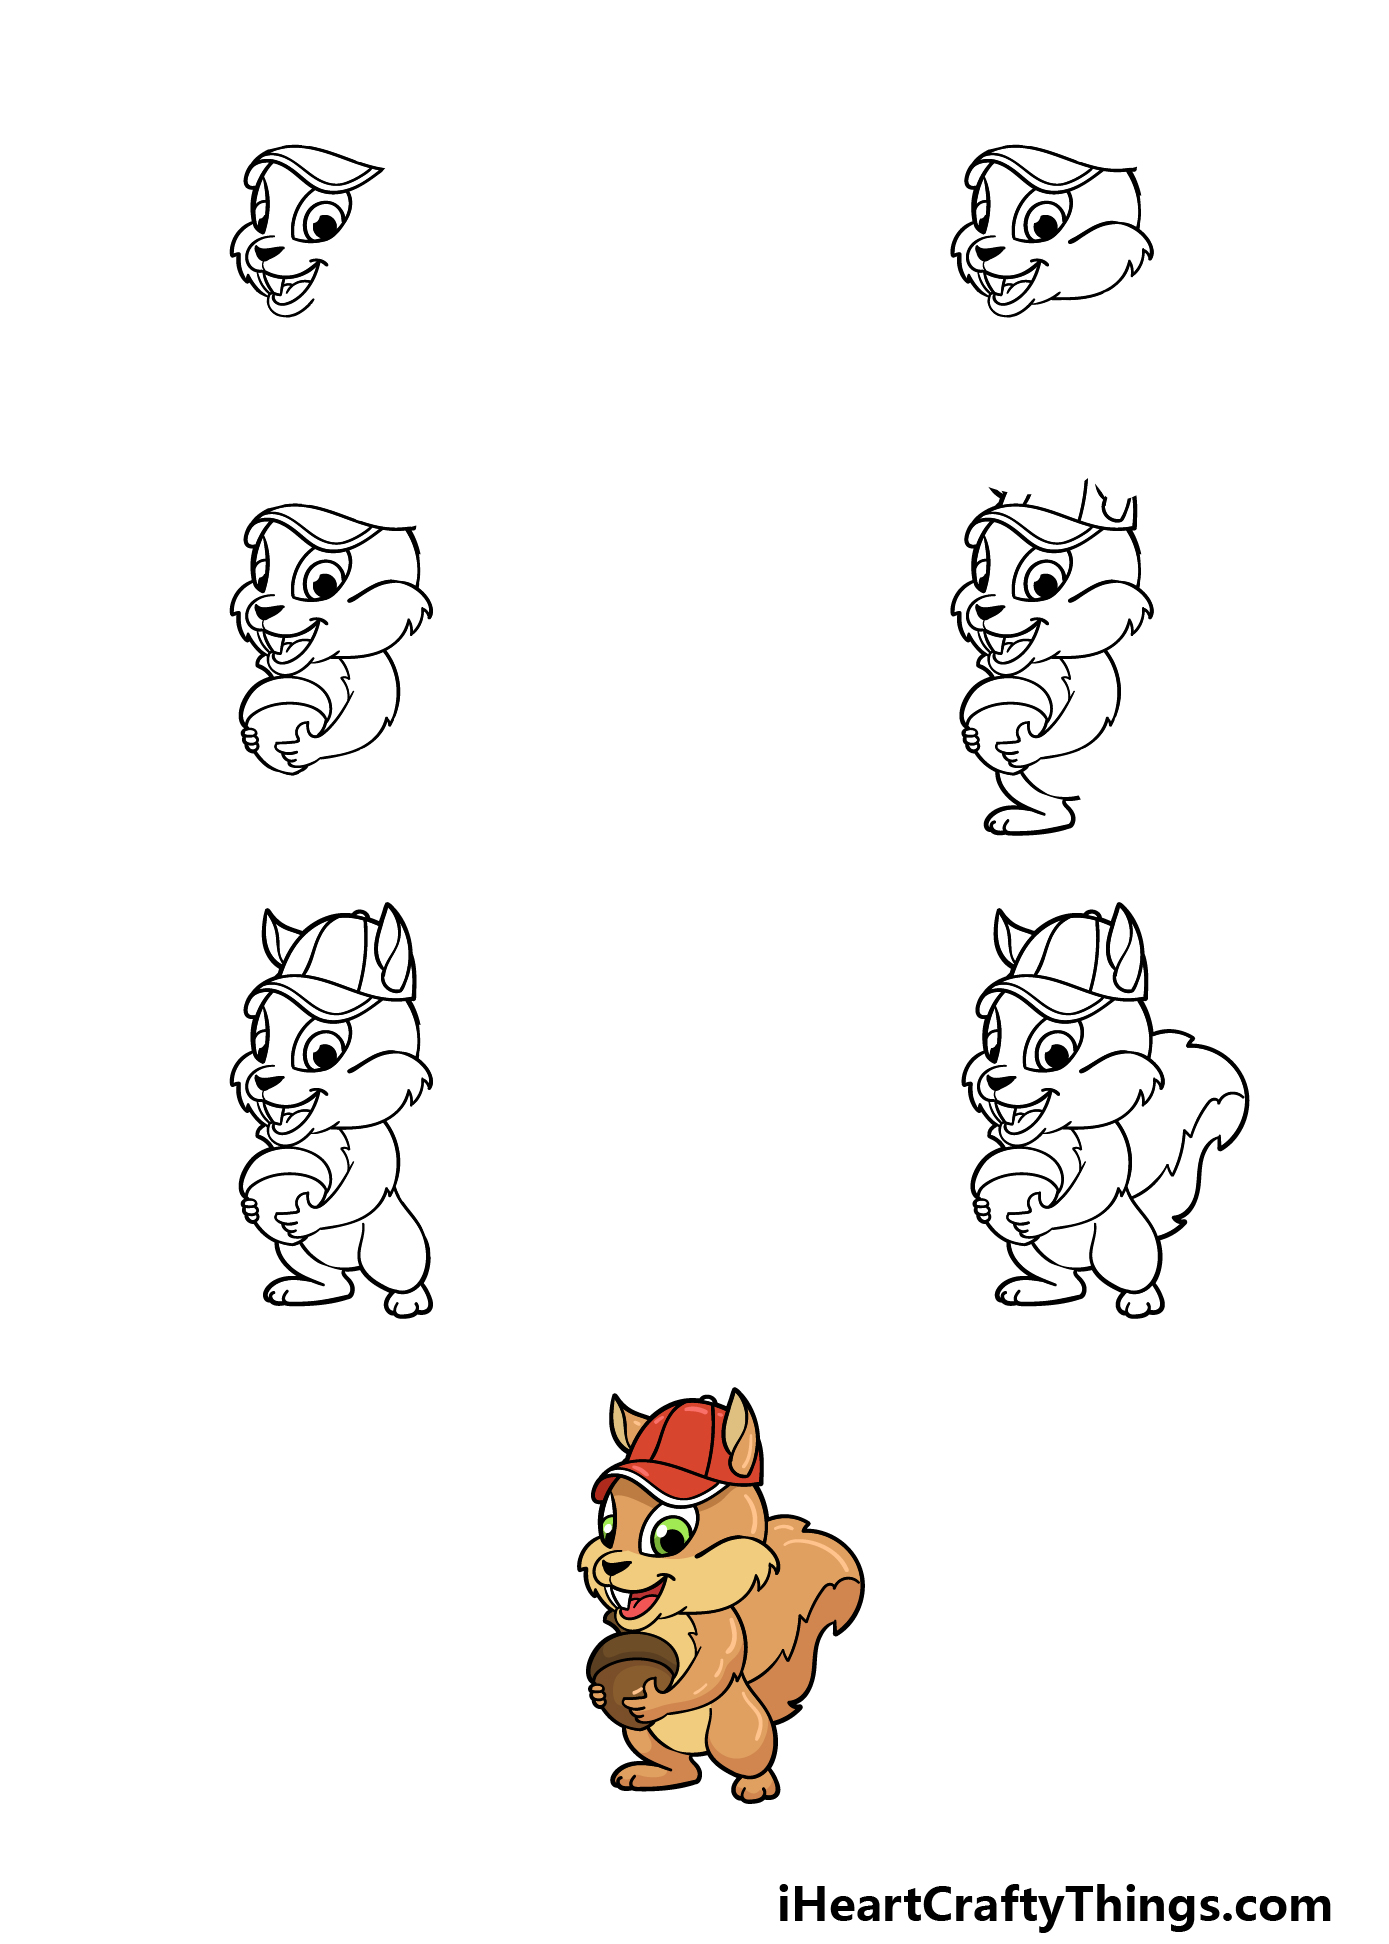 how to draw a cartoon chipmunk in 7 steps